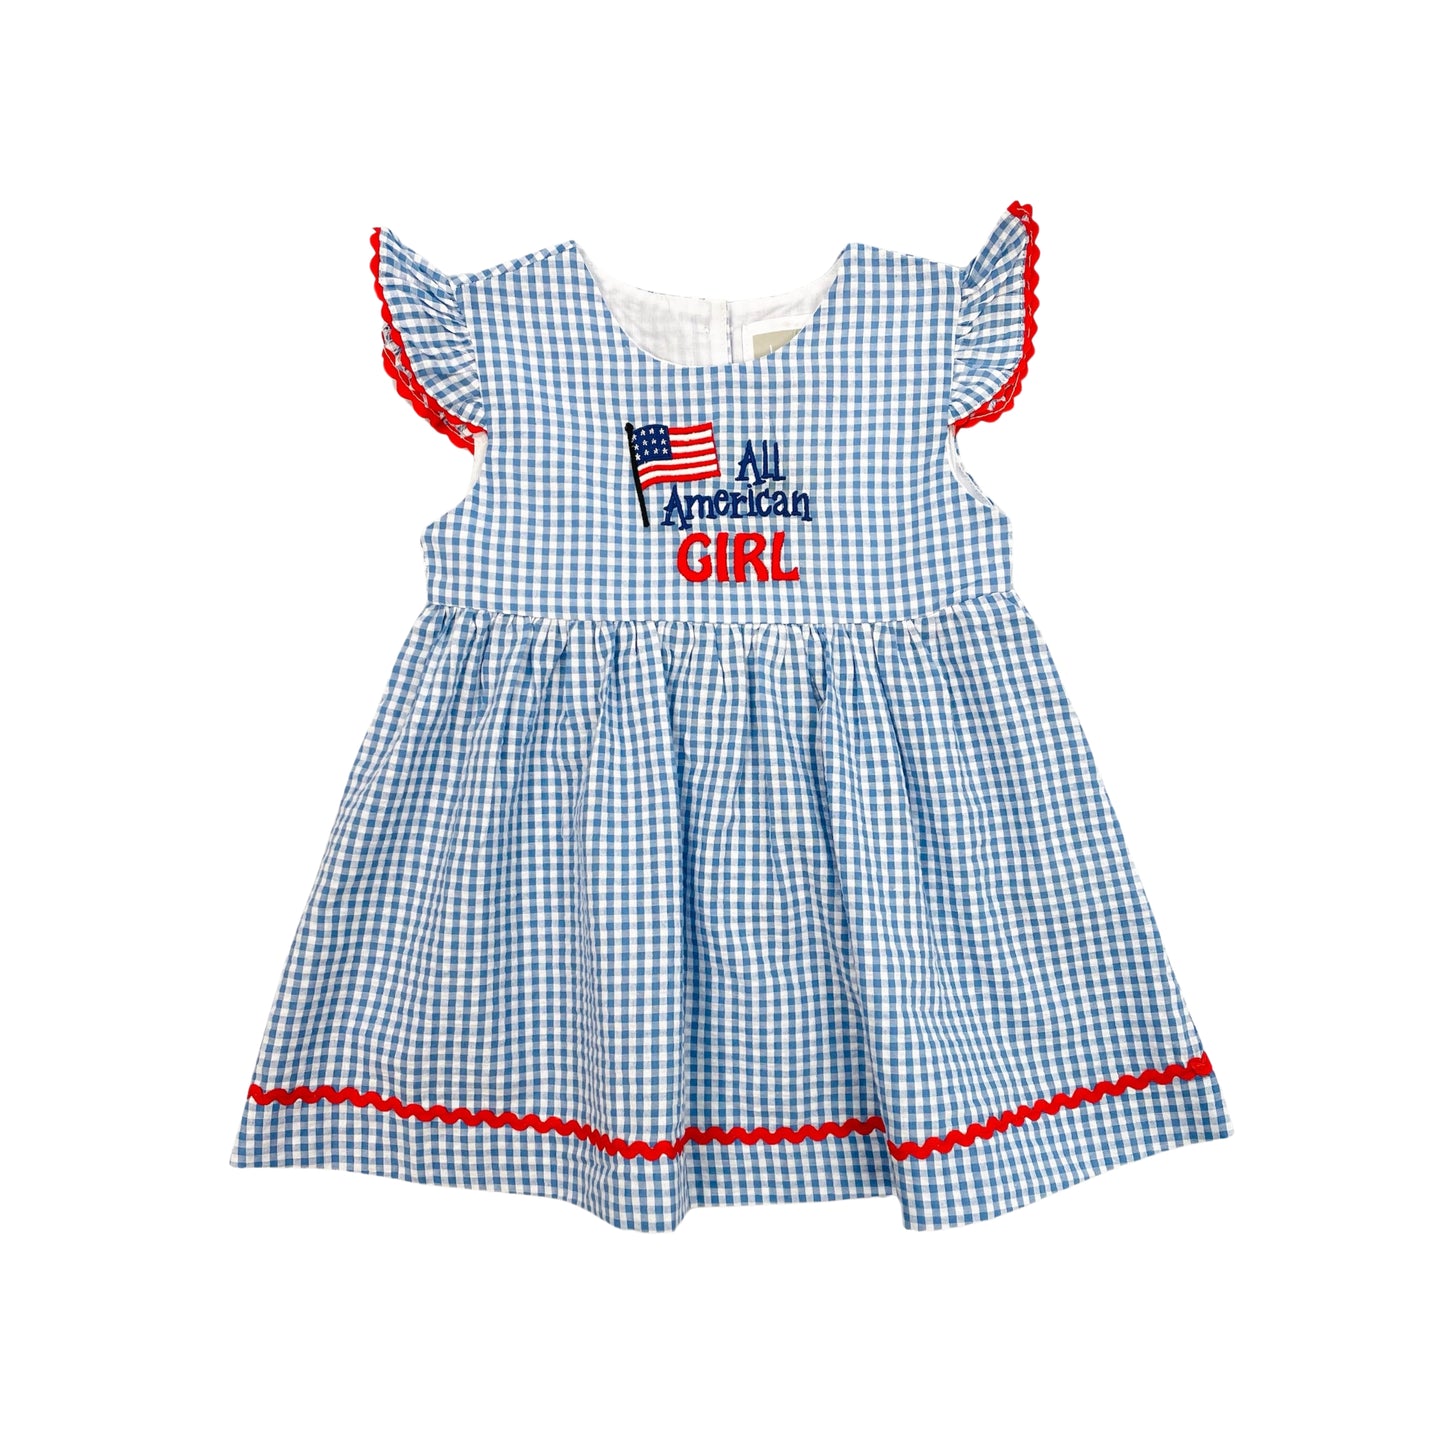 Lil Cactus Girls "All American Girl" Embroidered Dress